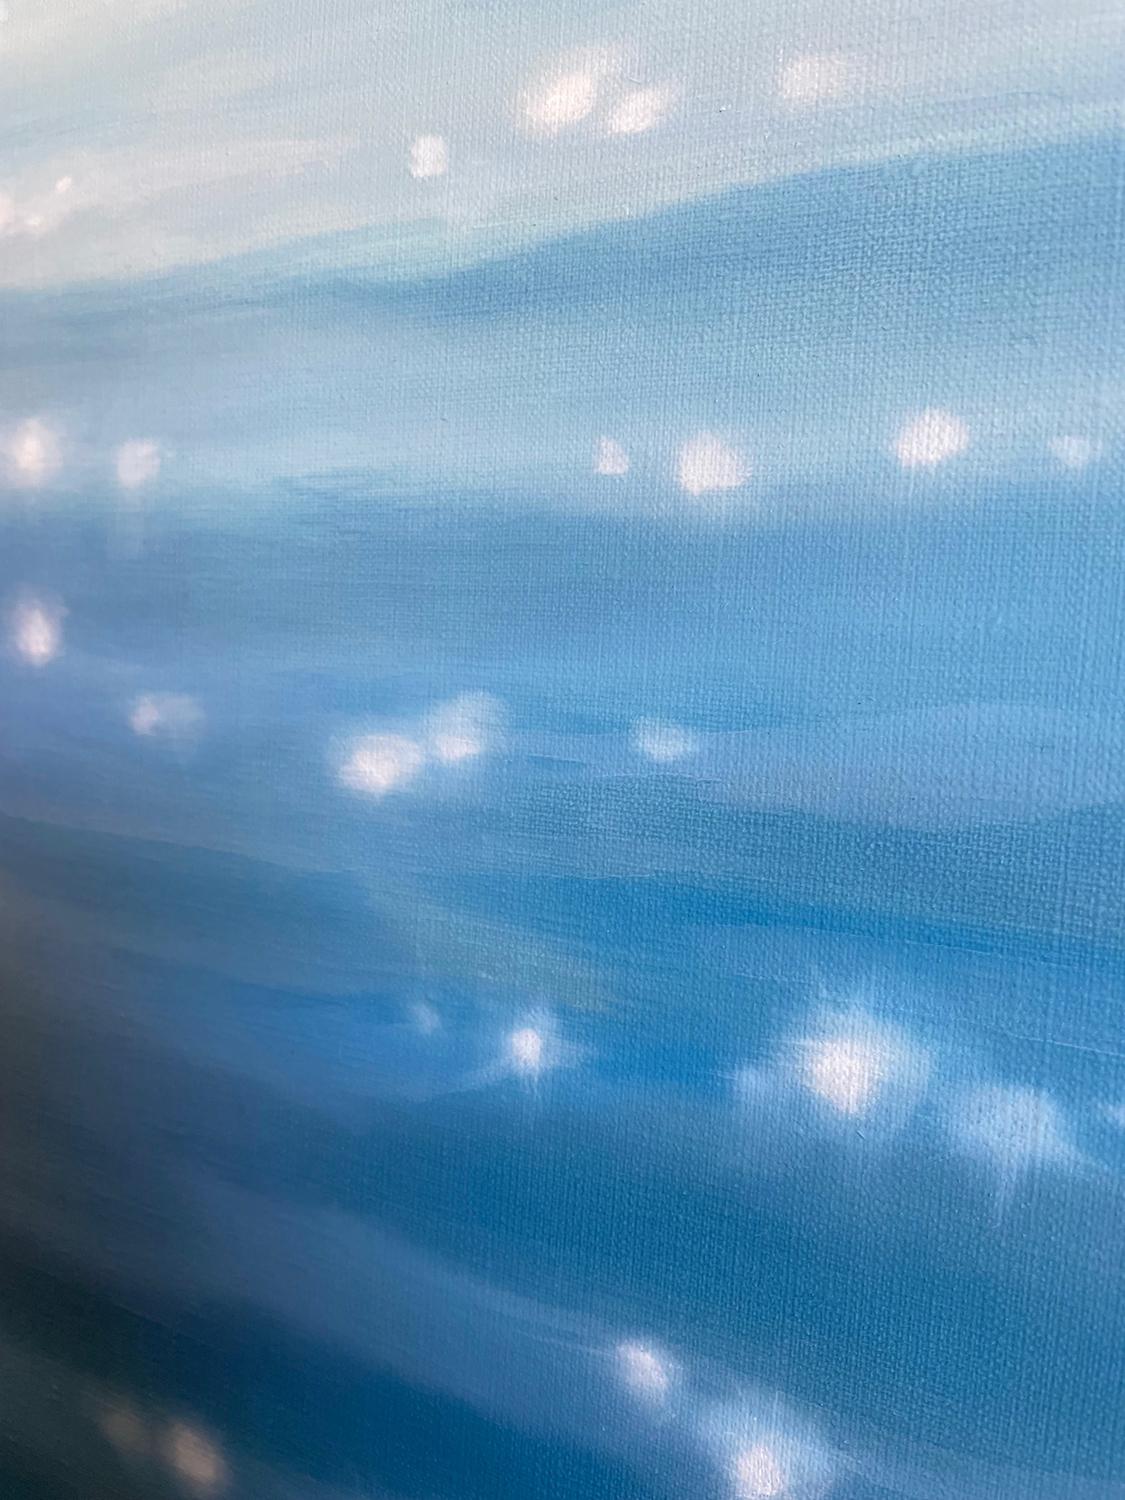 <p>Artist Comments<br />Sunlight sparkles off the surface of calm moving water. Artist Laura Browning draws inspiration from a time spent kayaking and stand-up paddling around Lake Tahoe in California. The cool blues and twinkling reflection bring